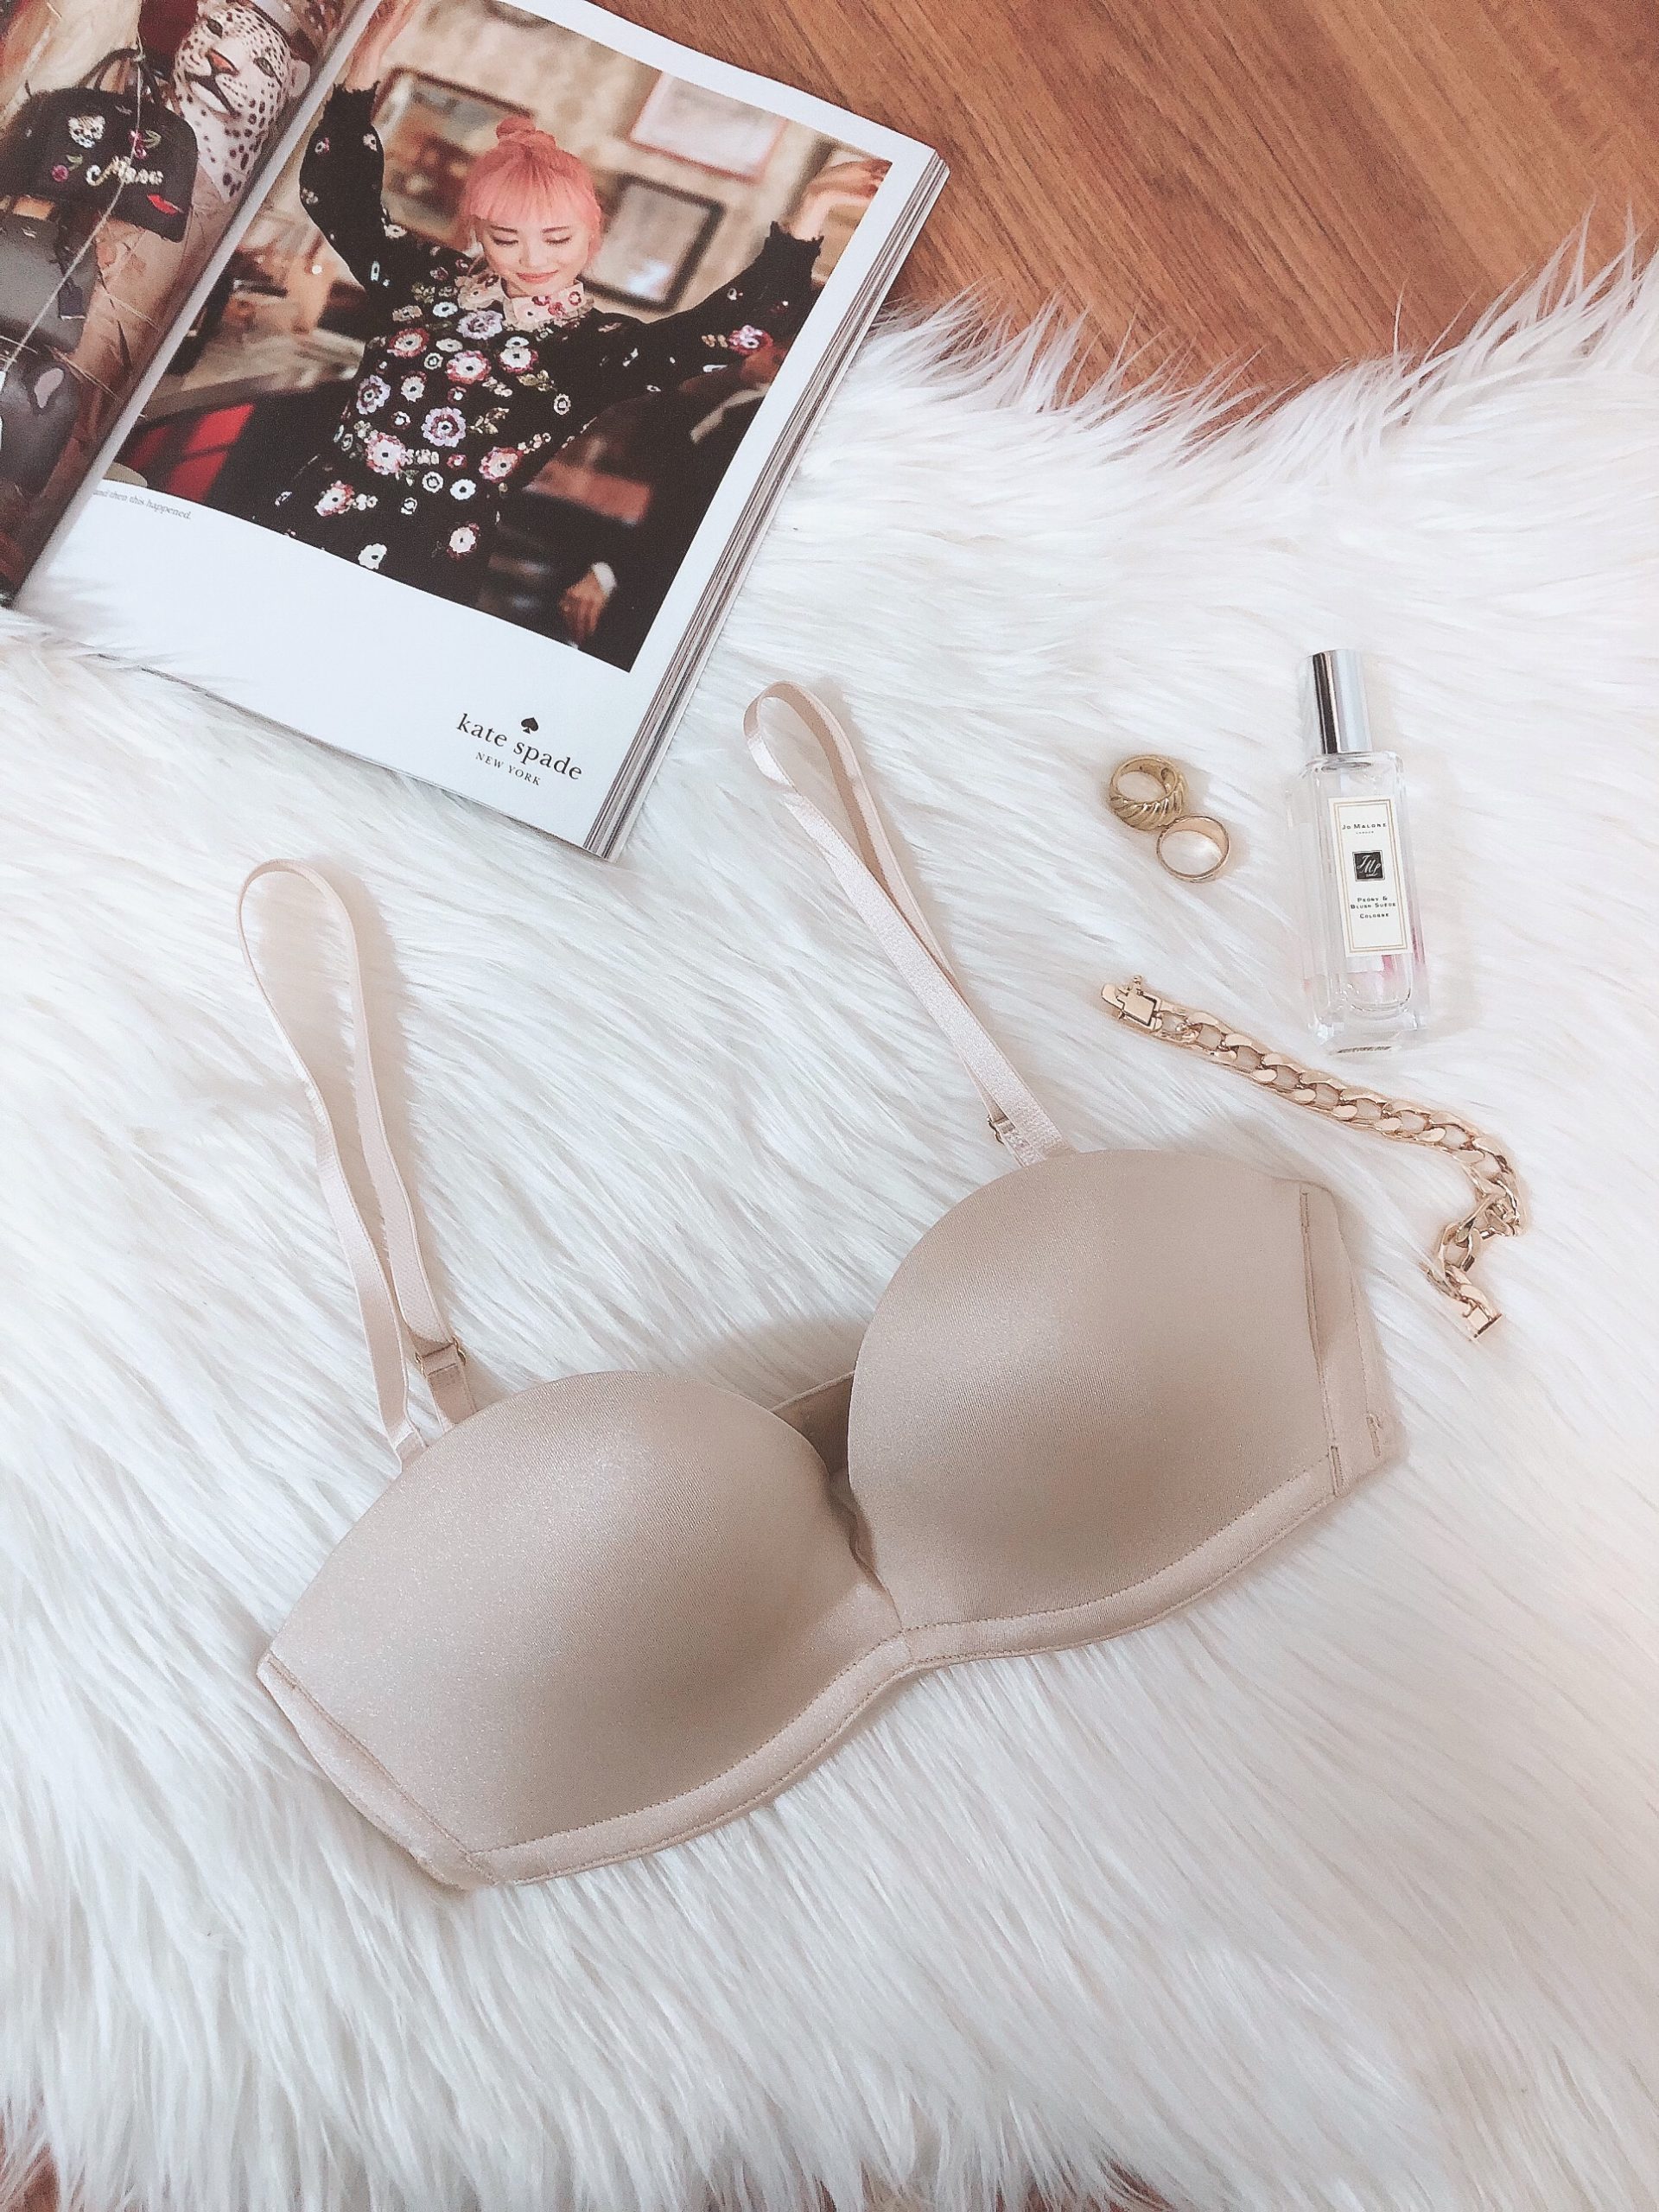 Sheaffer Told Me To - It's strapless bra season, and I've had lots of  reader questions lately asking for a recommendation for a strapless bra I  don't hate. WELL. I can do